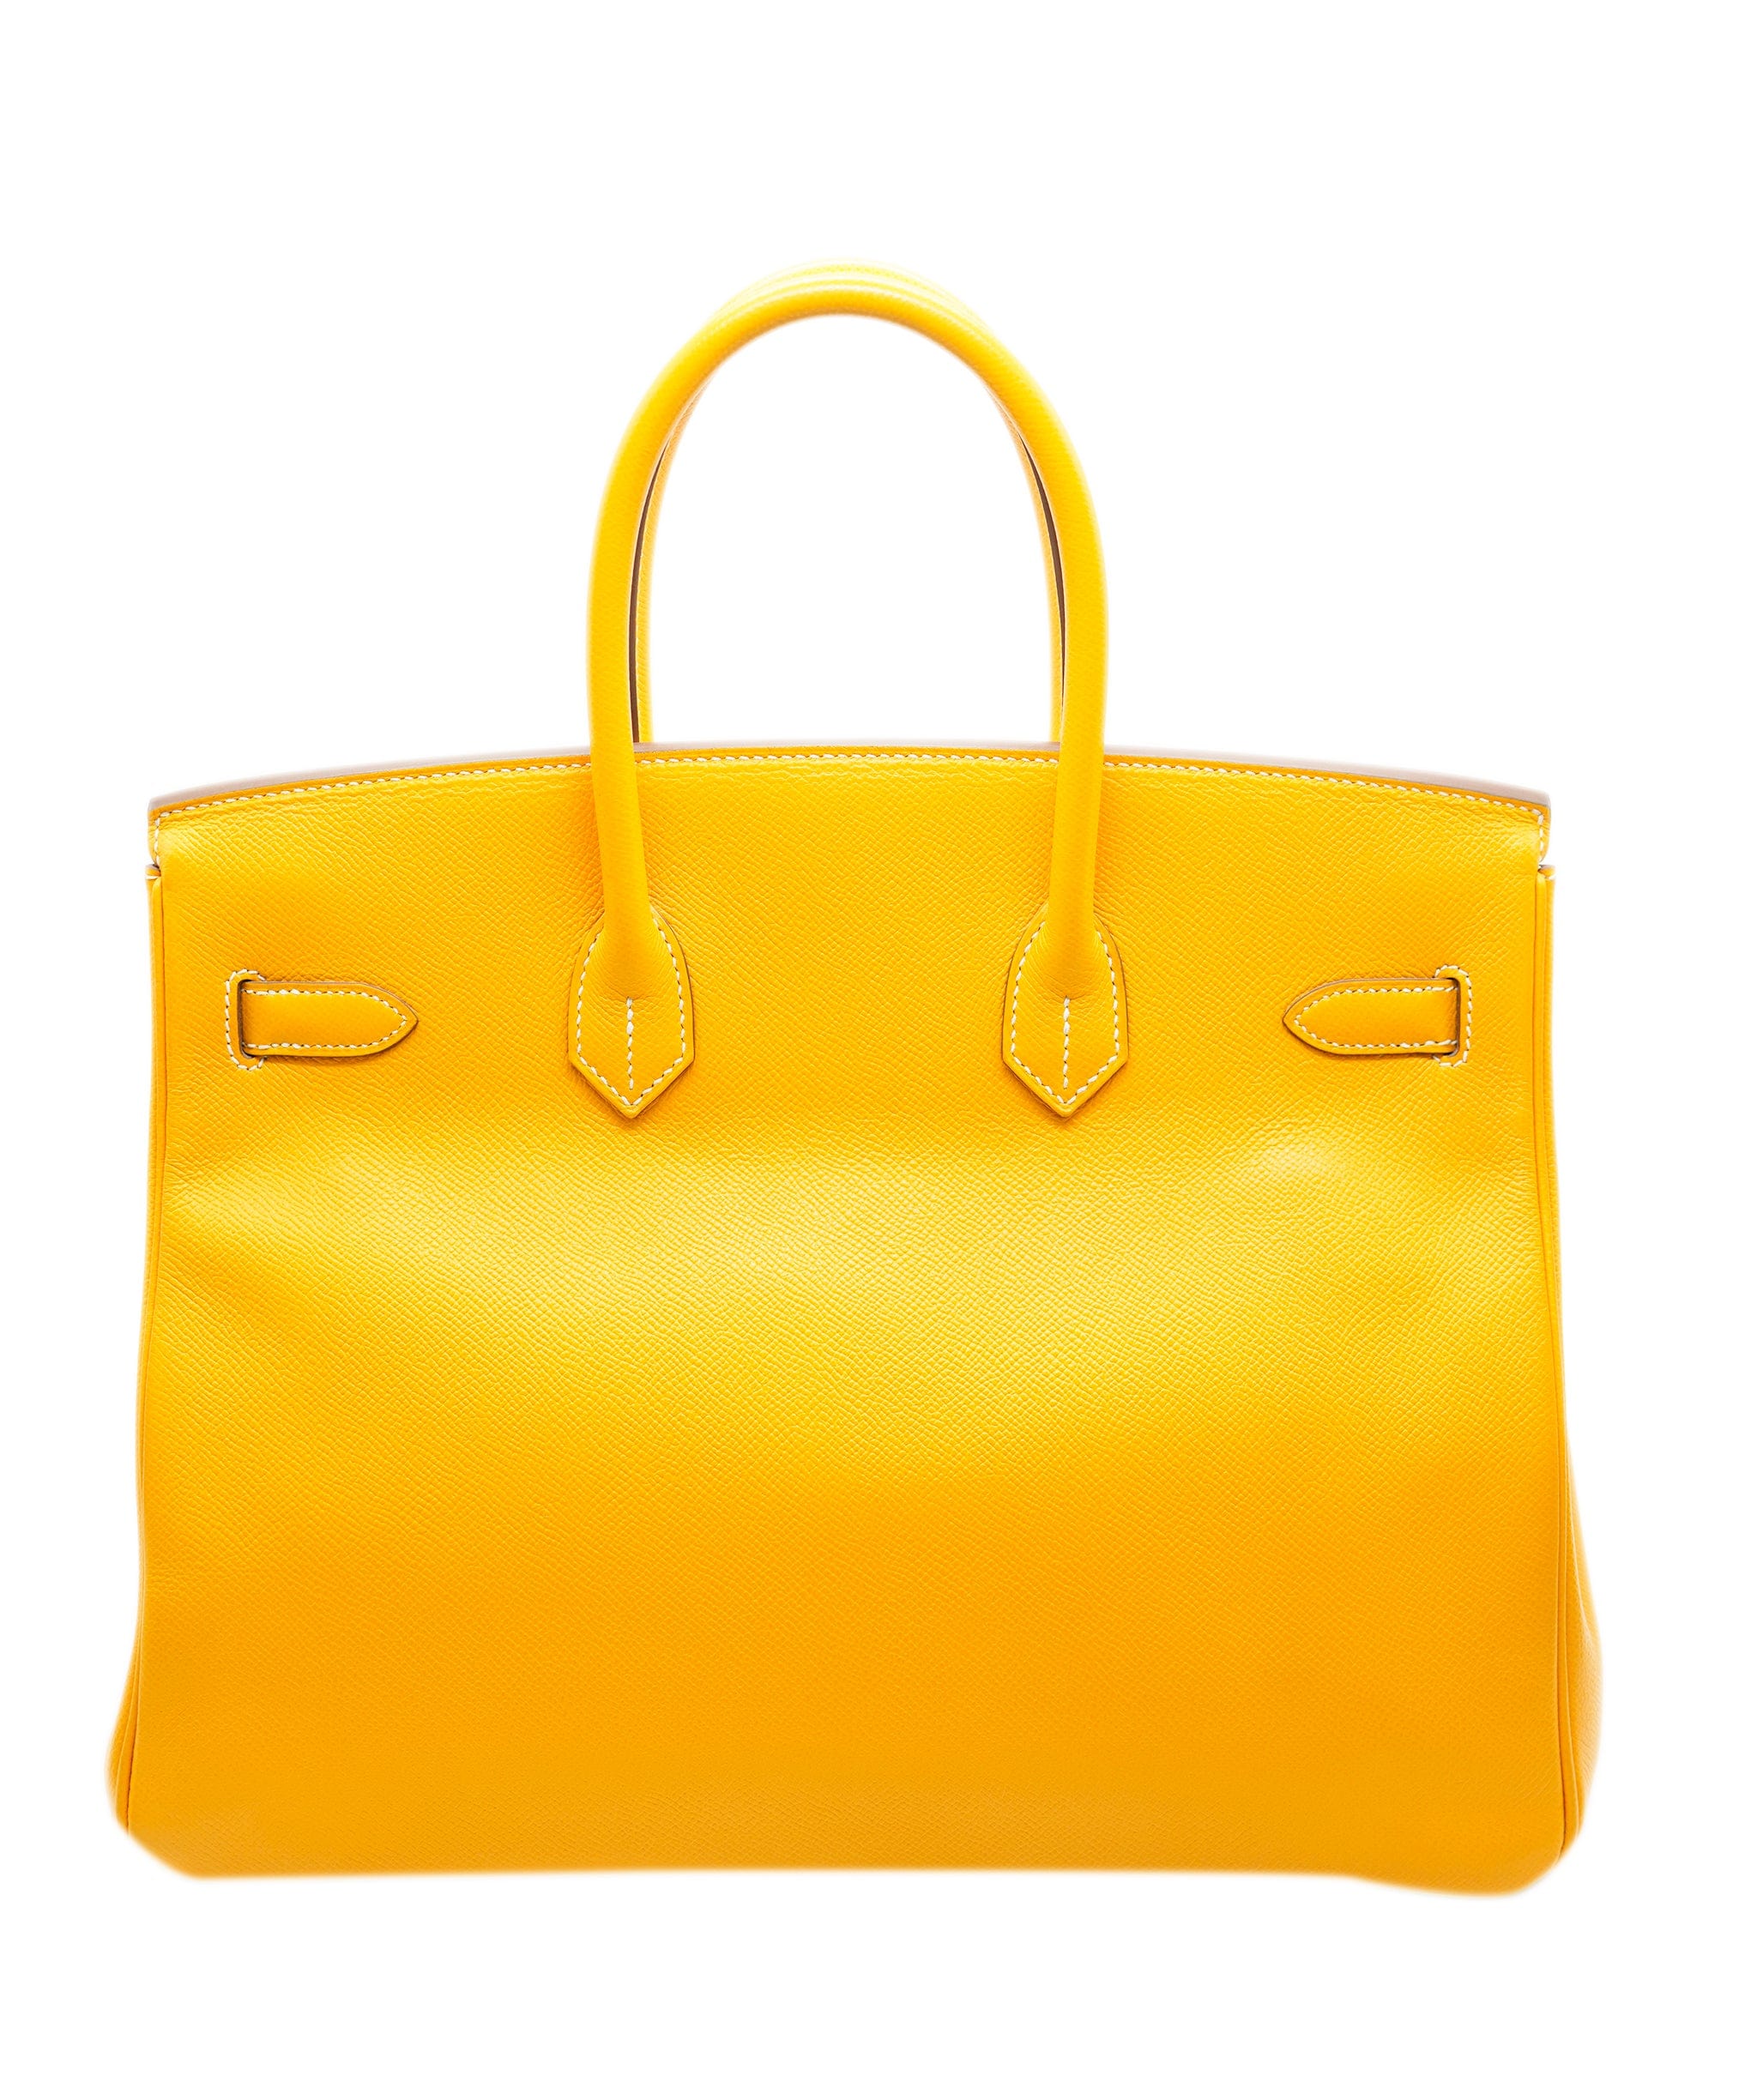 Hermès Hermes B35 Jaune D'or Candy Collection With Potiron Interior Epsom Permabrass hardware ASC4996